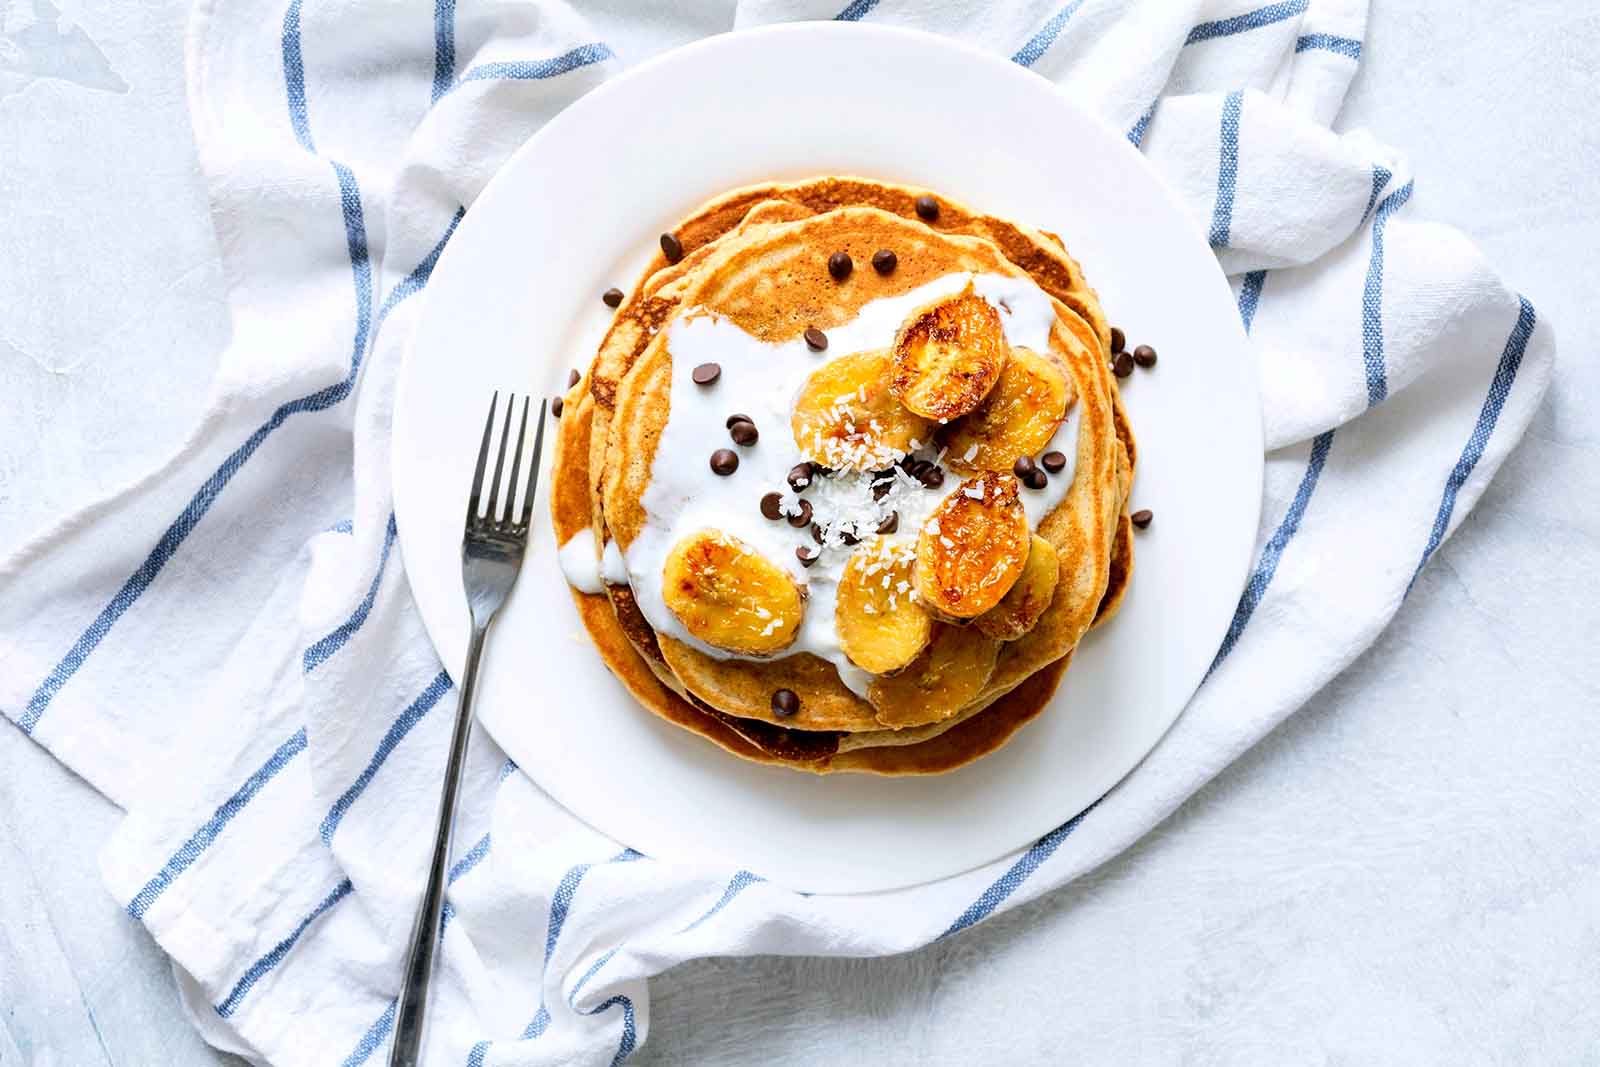 Almond or Whole Grain Pancakes, with Fresh Compote, Almond Yogurt, and Walnuts